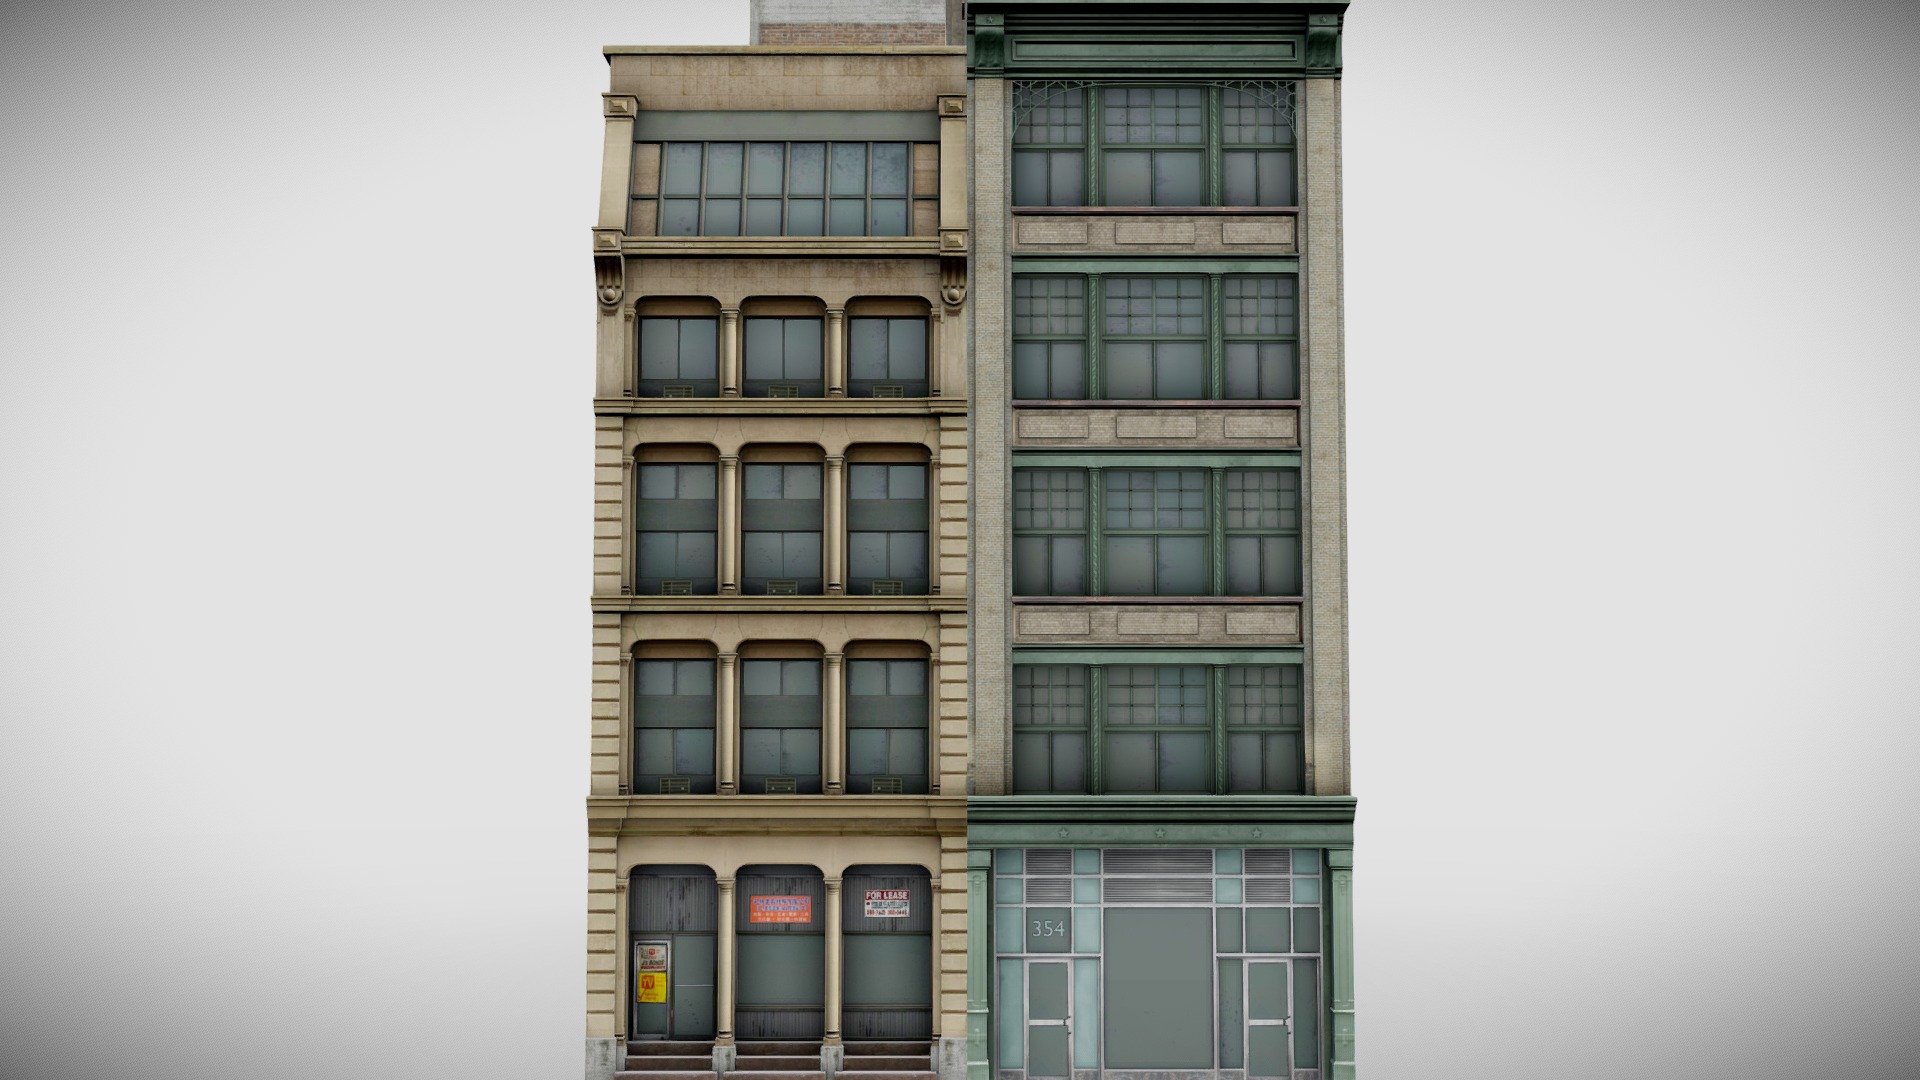 Generic SoHo building facades in Manhattan



Textures Included:




2k baked textures

Diffuse

Roughness

Ambient Occlusion

Formats:




.obj

.fbx

.blend

View the full building pack here: https://sketchfab.com/3d-models/manhattan-modular-city-block-358-broadway-st-71f1ca2b46a84c0d907b71f78c34b790 - Low Poly SoHo Building Facades - Buy Royalty Free 3D model by 99.Miles 3d model